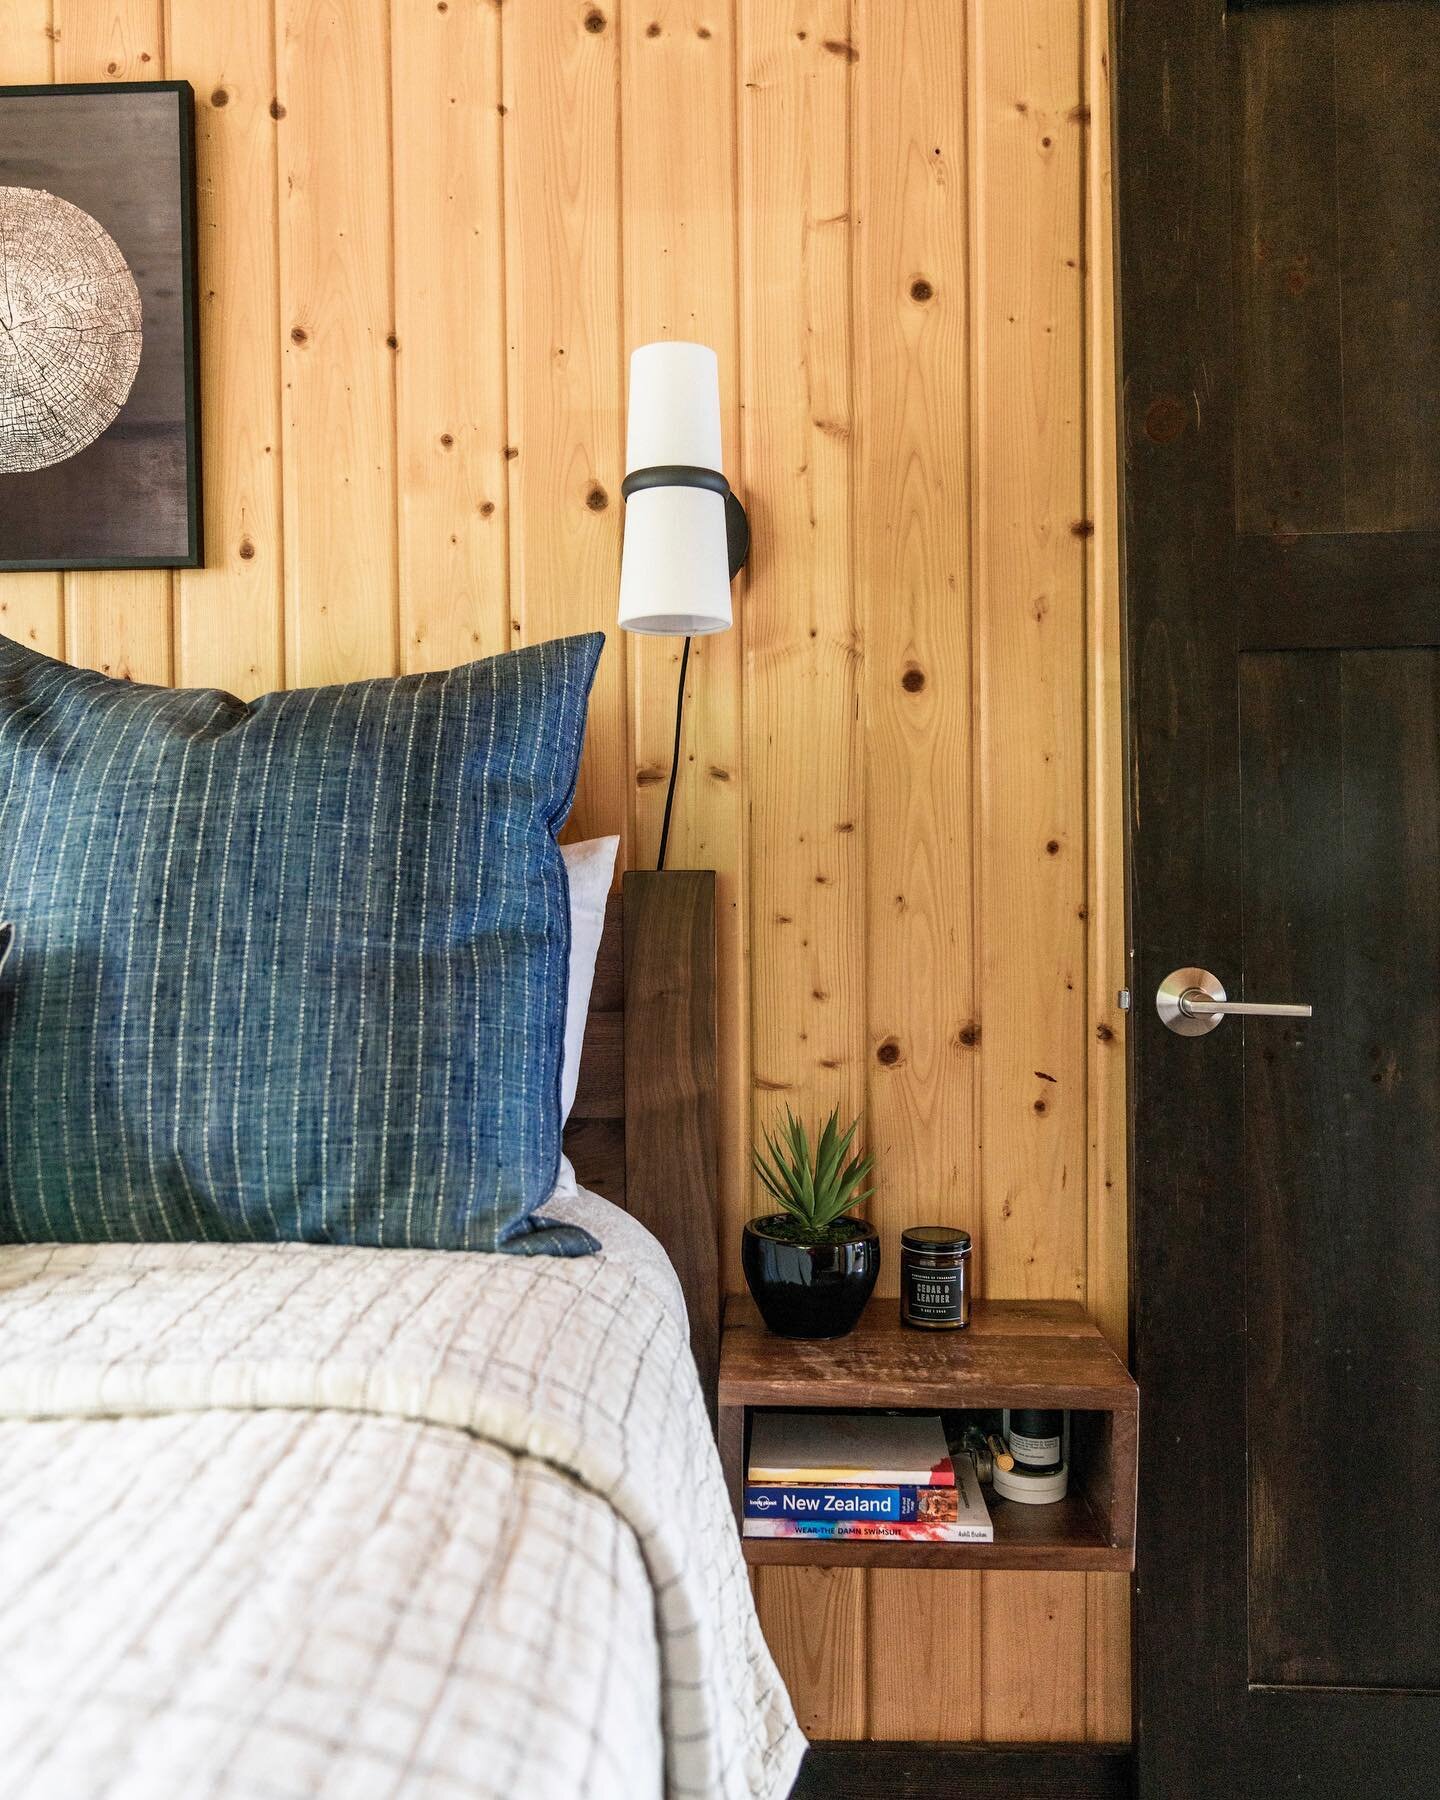 Transformation unlocked!
Cabin &gt;&gt;&gt; Forever Home

I set out to craft a space that felt as adventurous as the client.

Here&rsquo;s what they had to say:
&ldquo;My wife and I hired Bethany for an entire home refresh. We&rsquo;ve recently moved